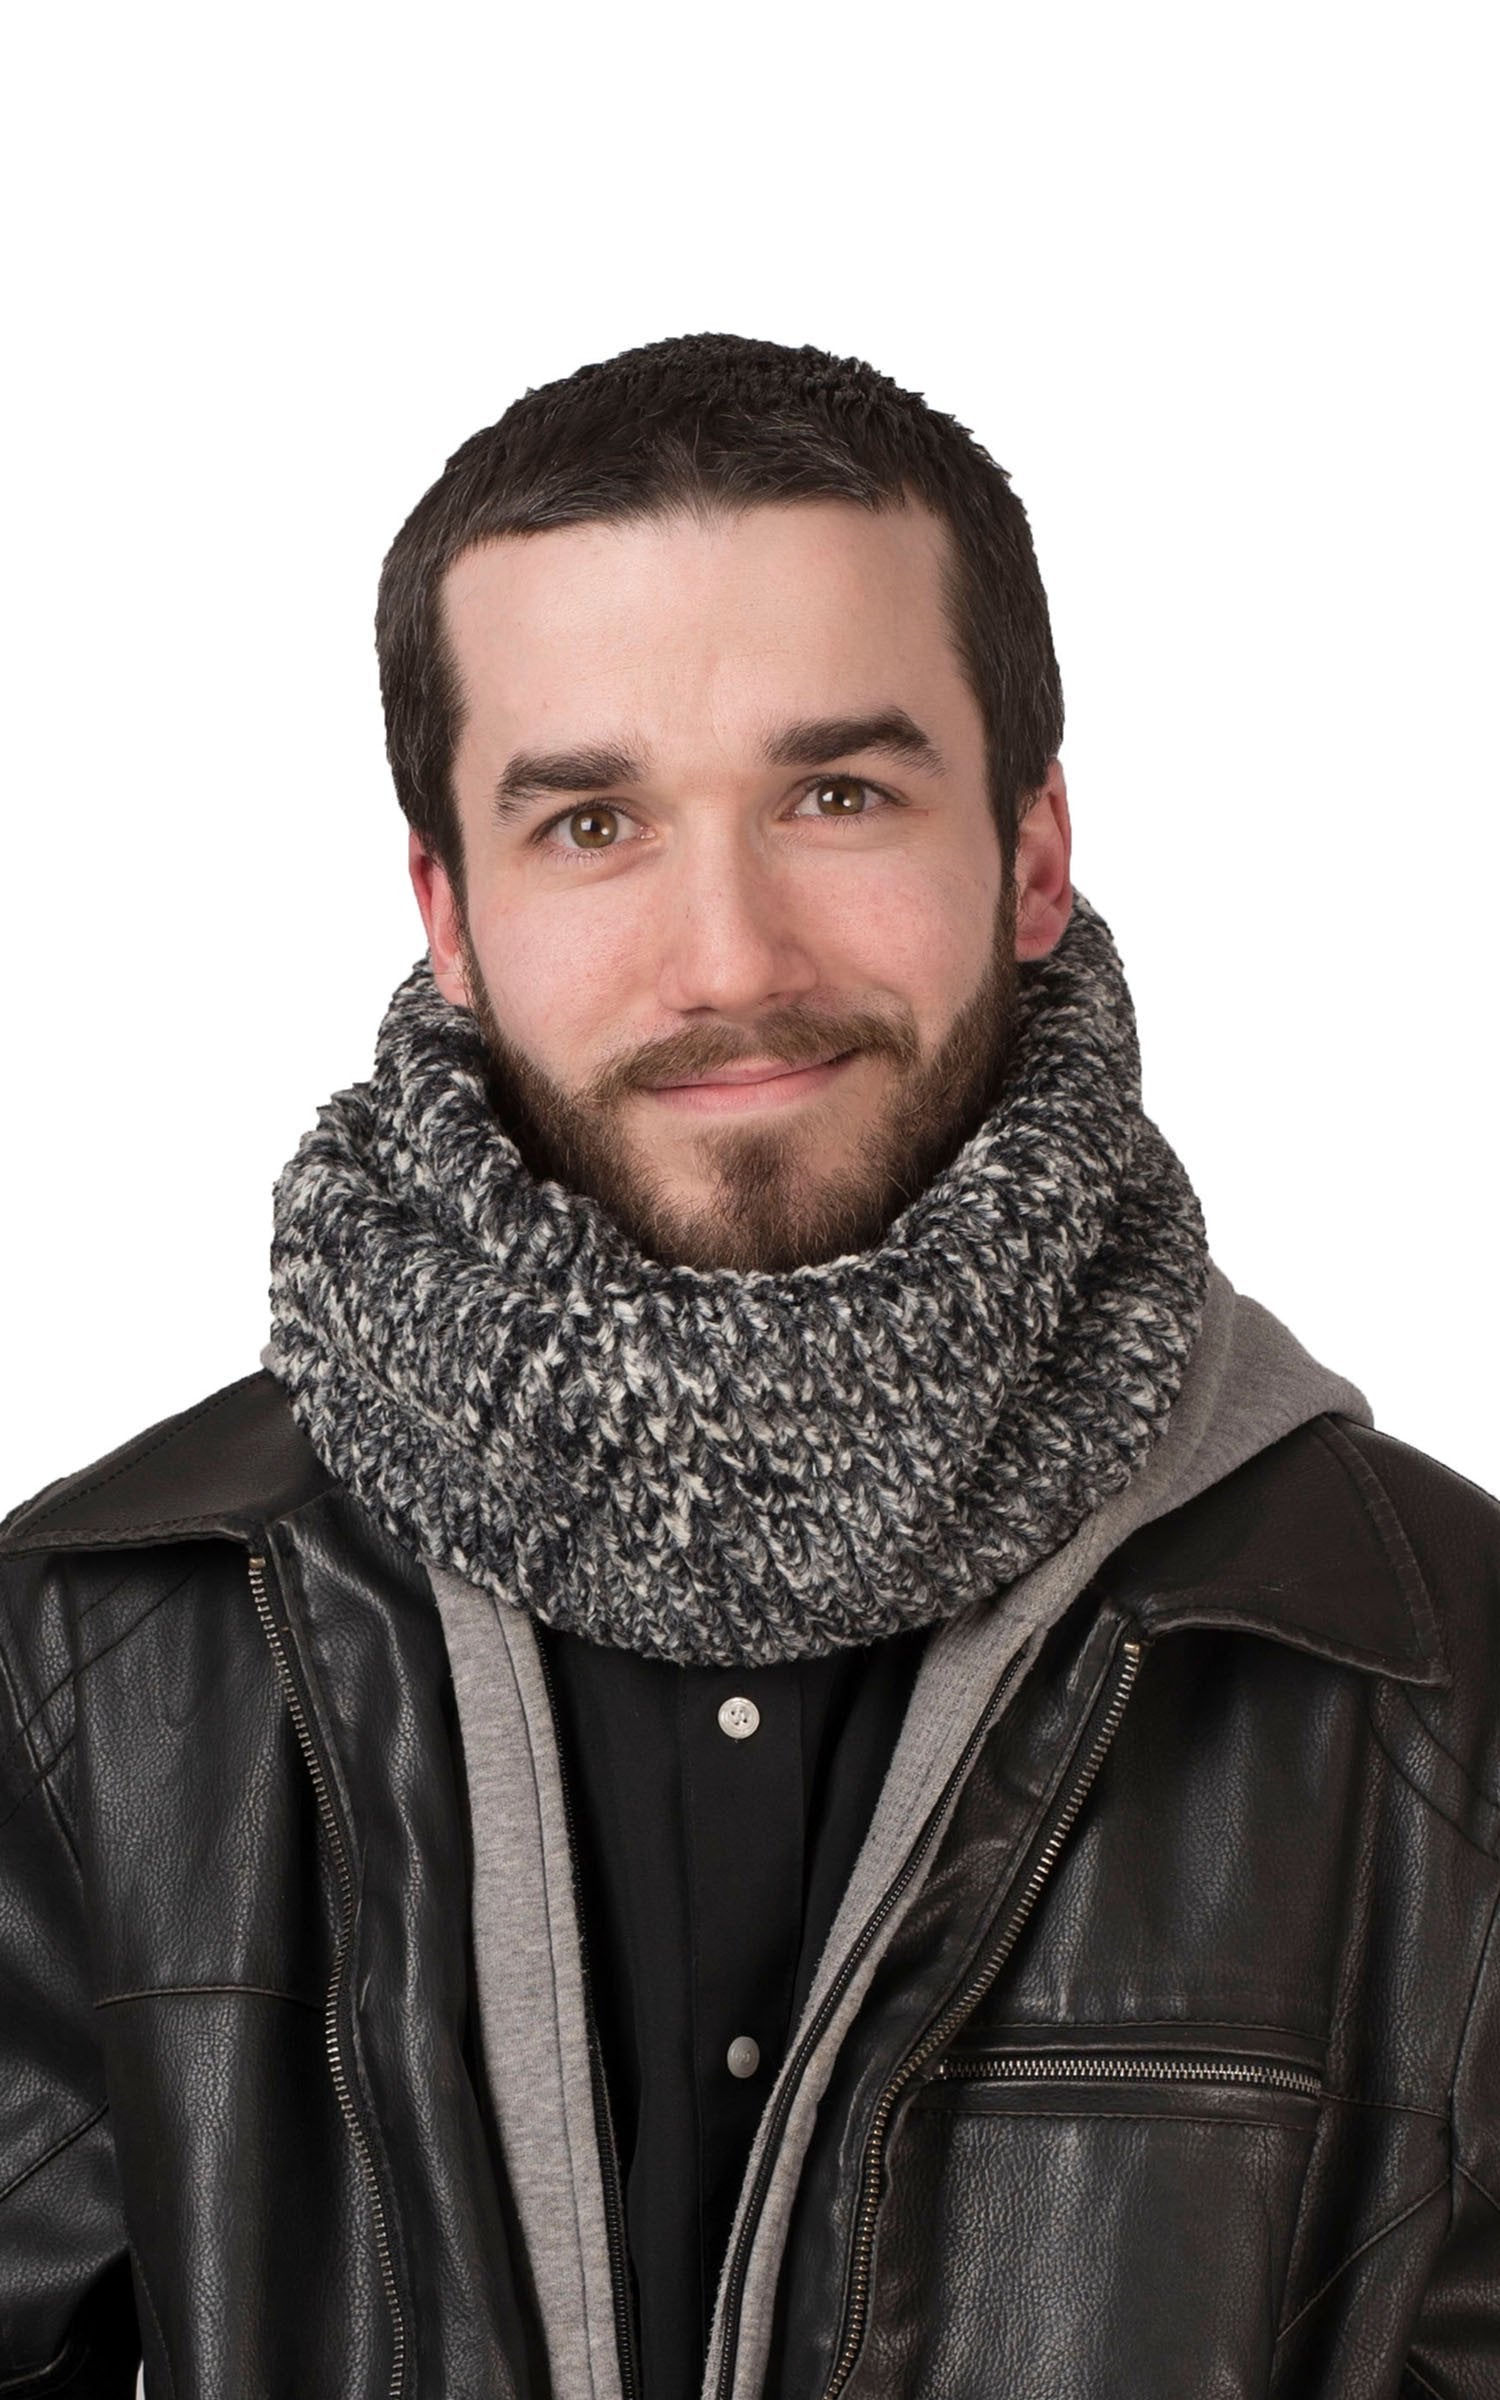 Men's Neck Warmer | Cozy Cable Black and White Faux Fur | Handmade in the USA by Pandemonium Seattle